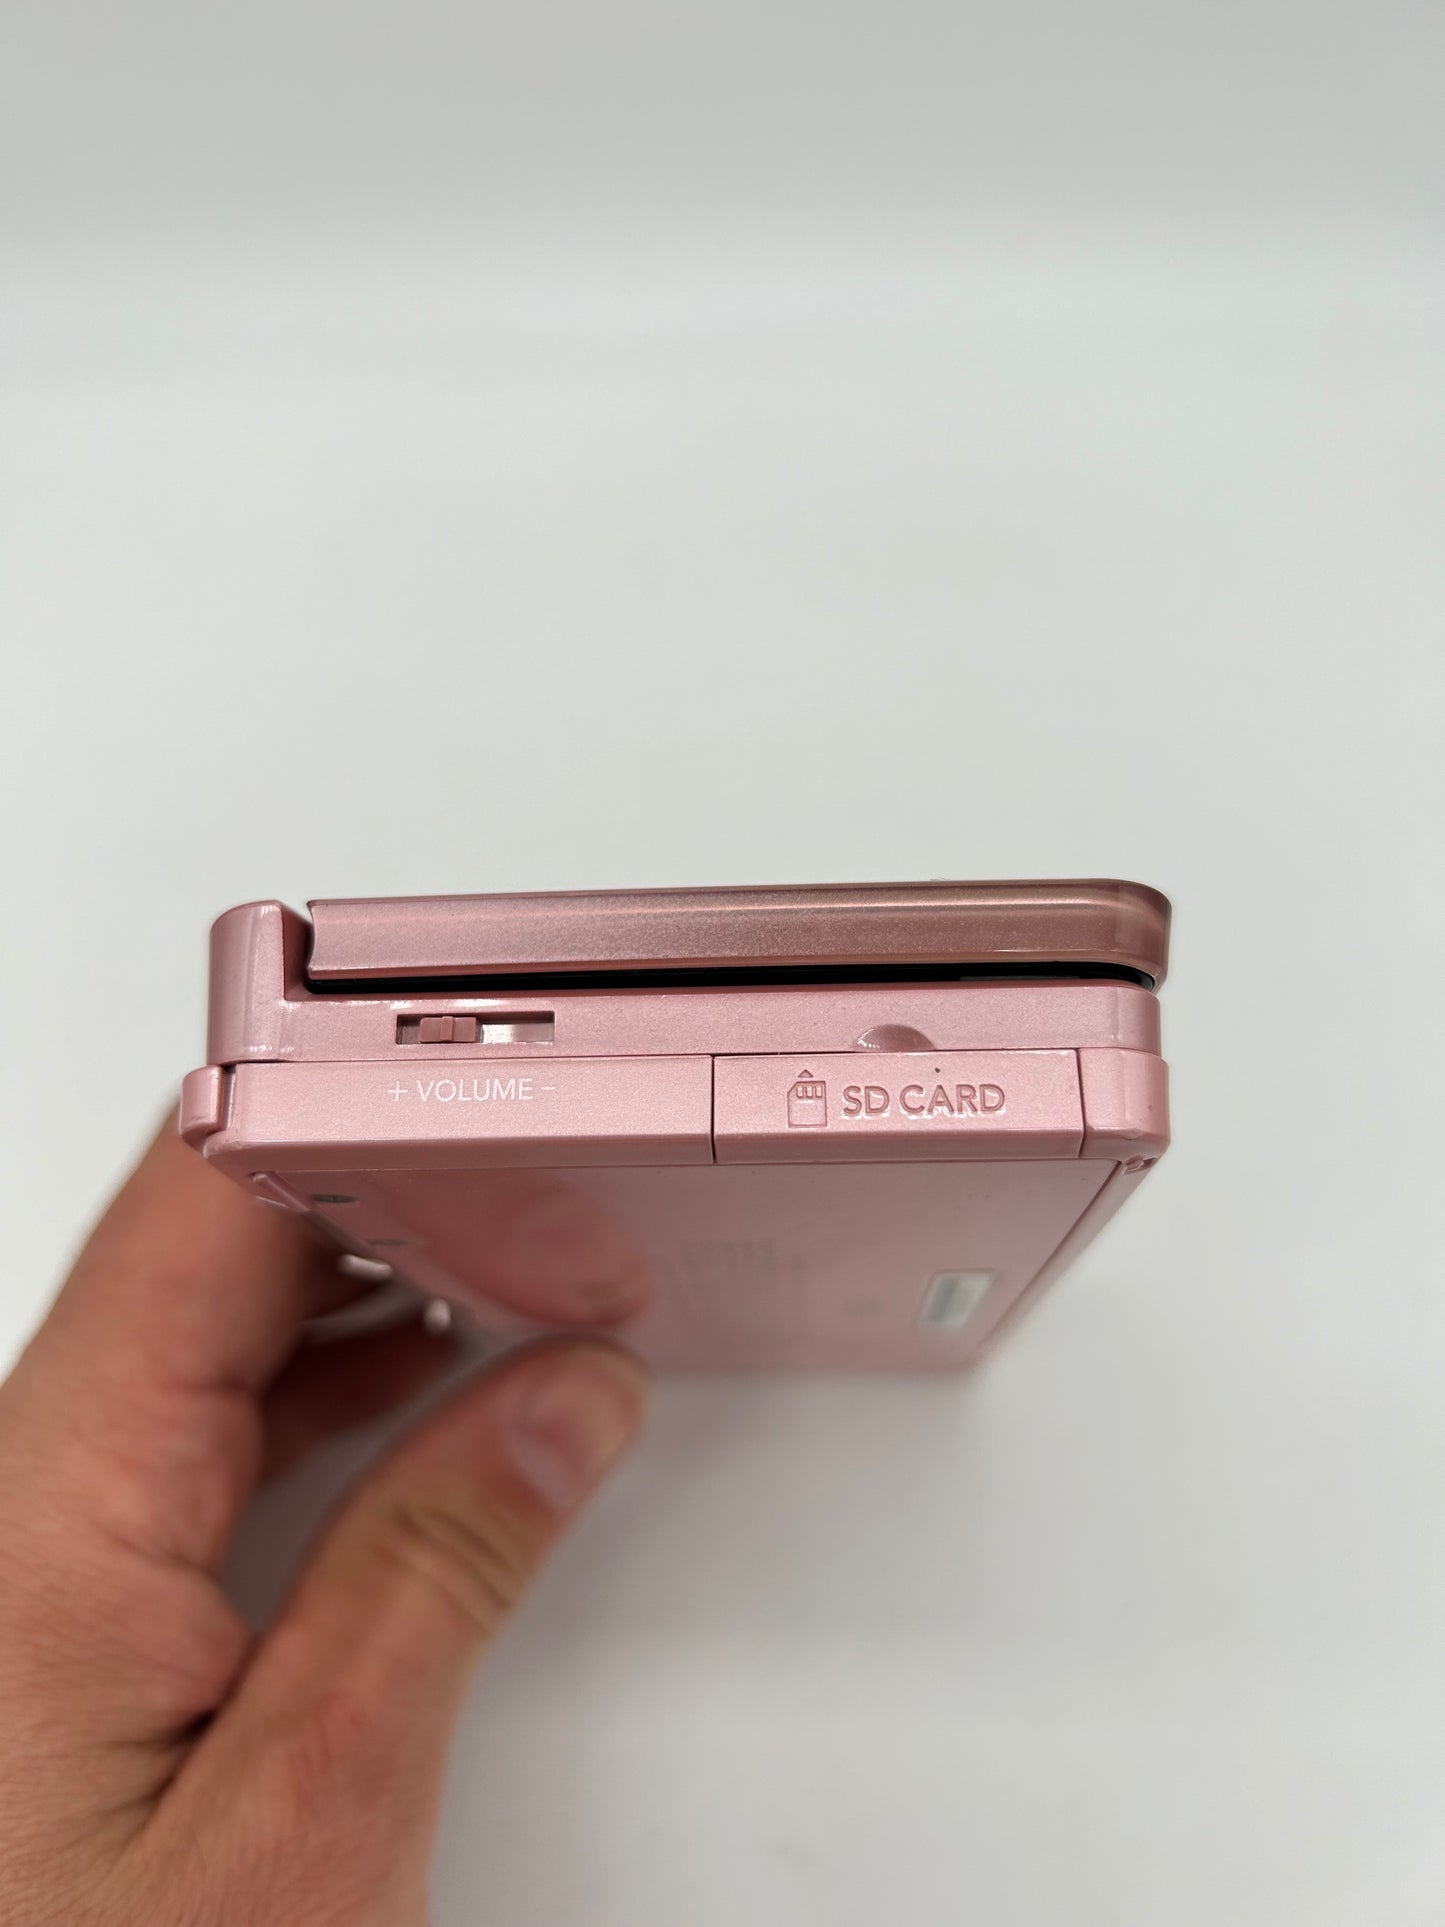 NiNTENDO 3DS CONSOLE | MODEL ROSE PERLE PEARL PiNK CTR-001(USA